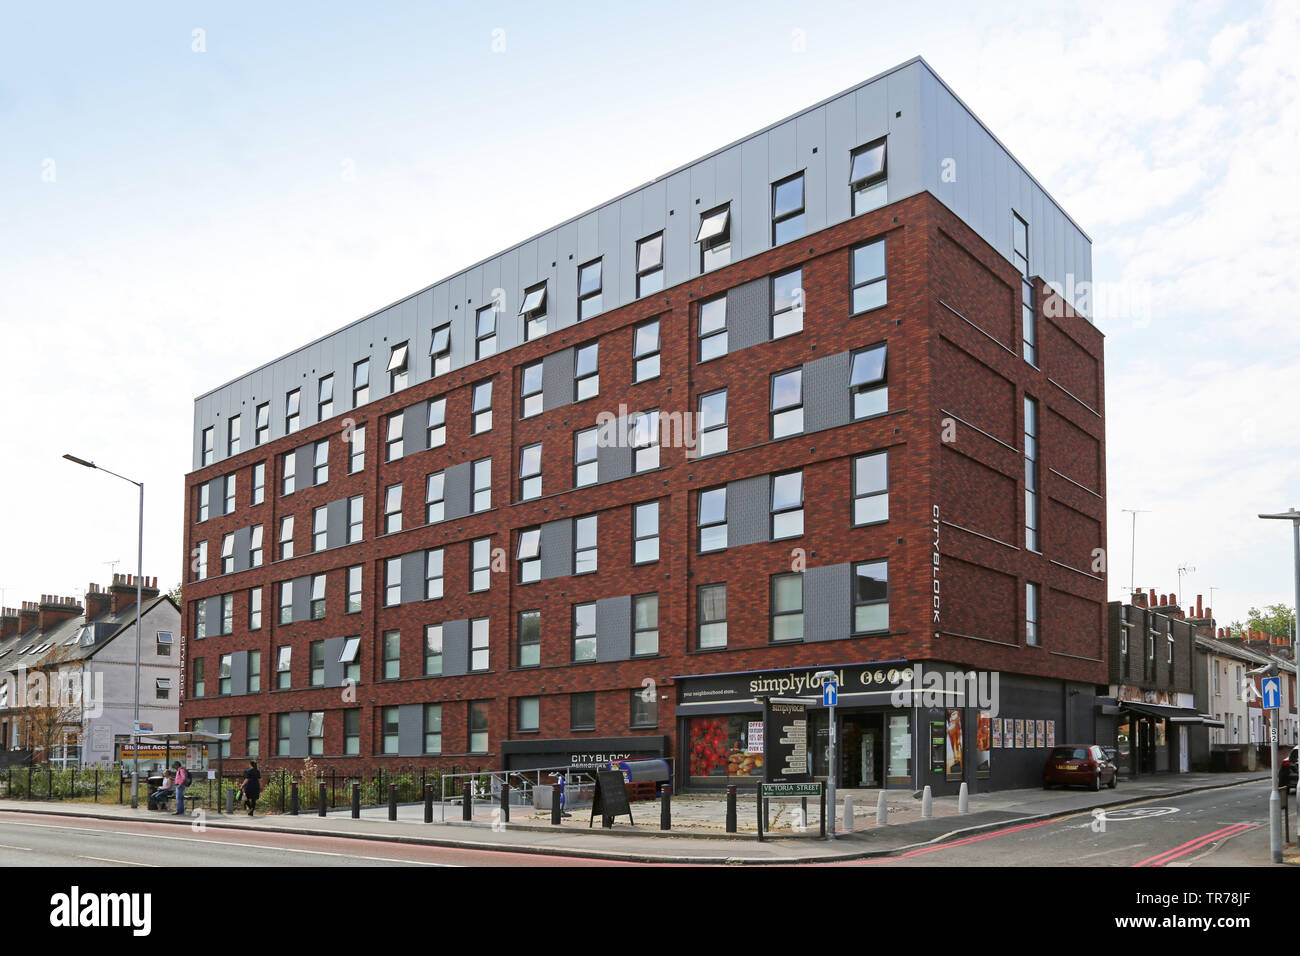 Berkshire House, Reading, UK. An office block remodelled to provide student accommodation. Work included recladding the building with brick slips. Stock Photo